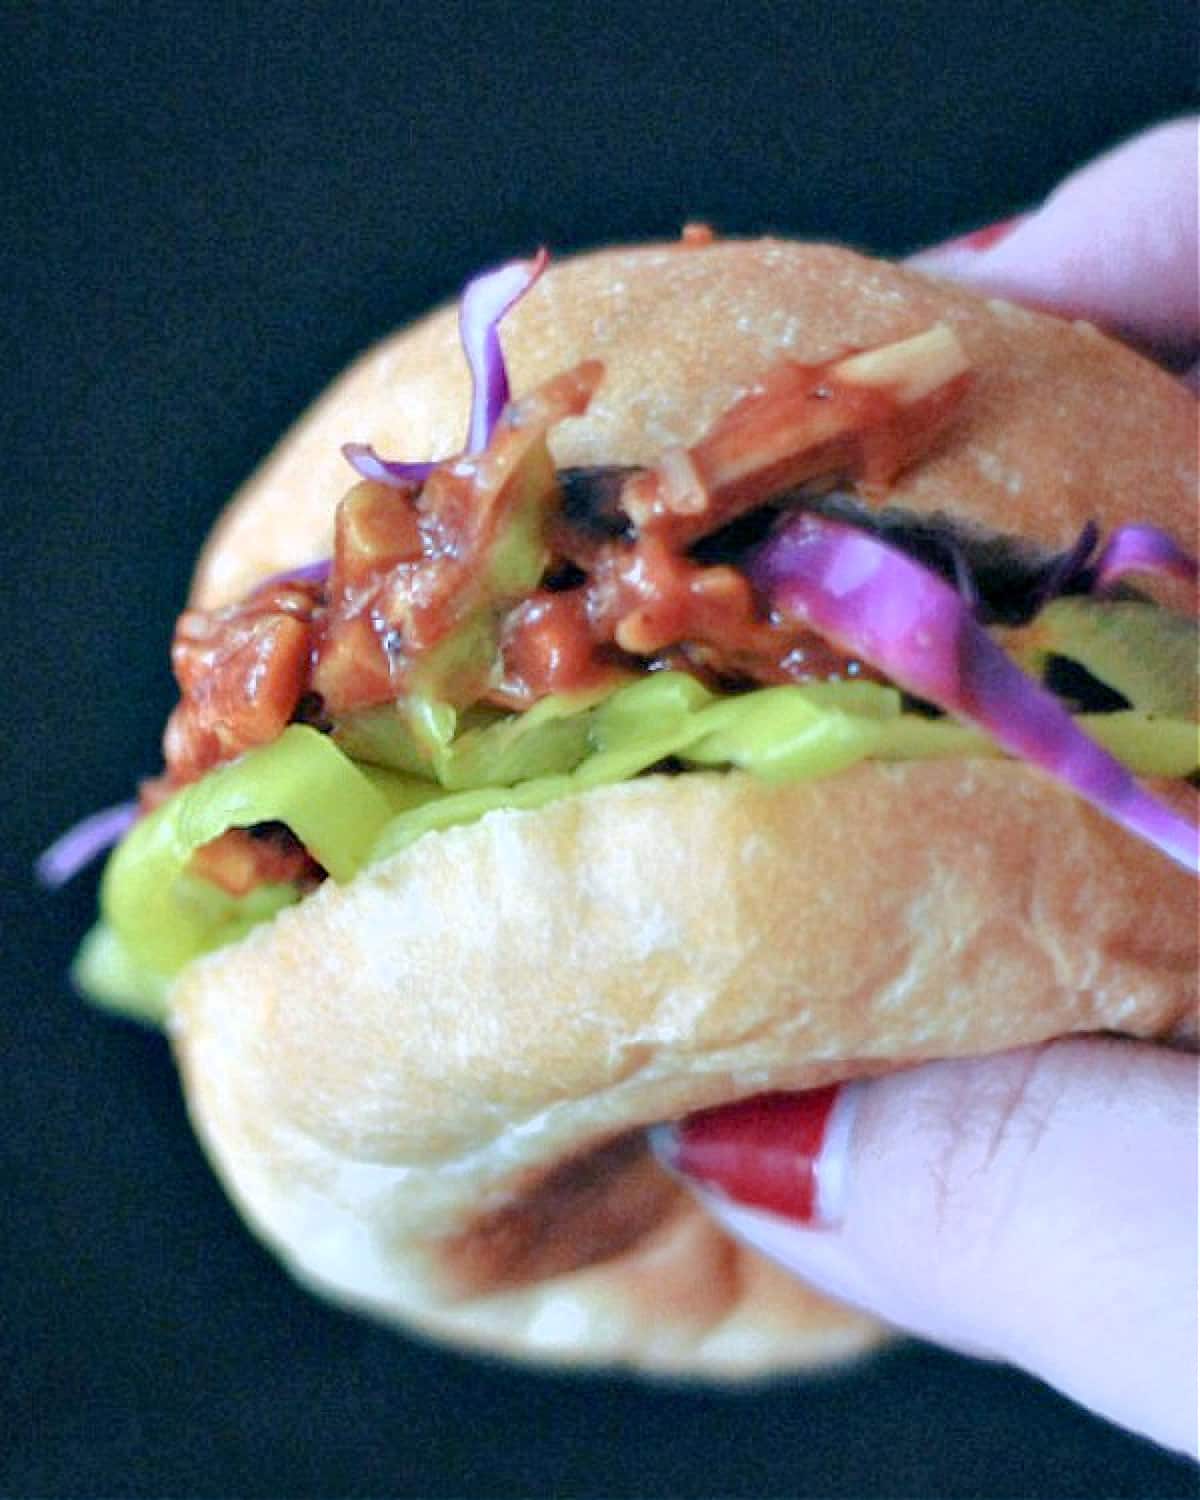 A hand holding a vegan pulled porcini slider with purple cabbage and pepperoncini pepper rings.